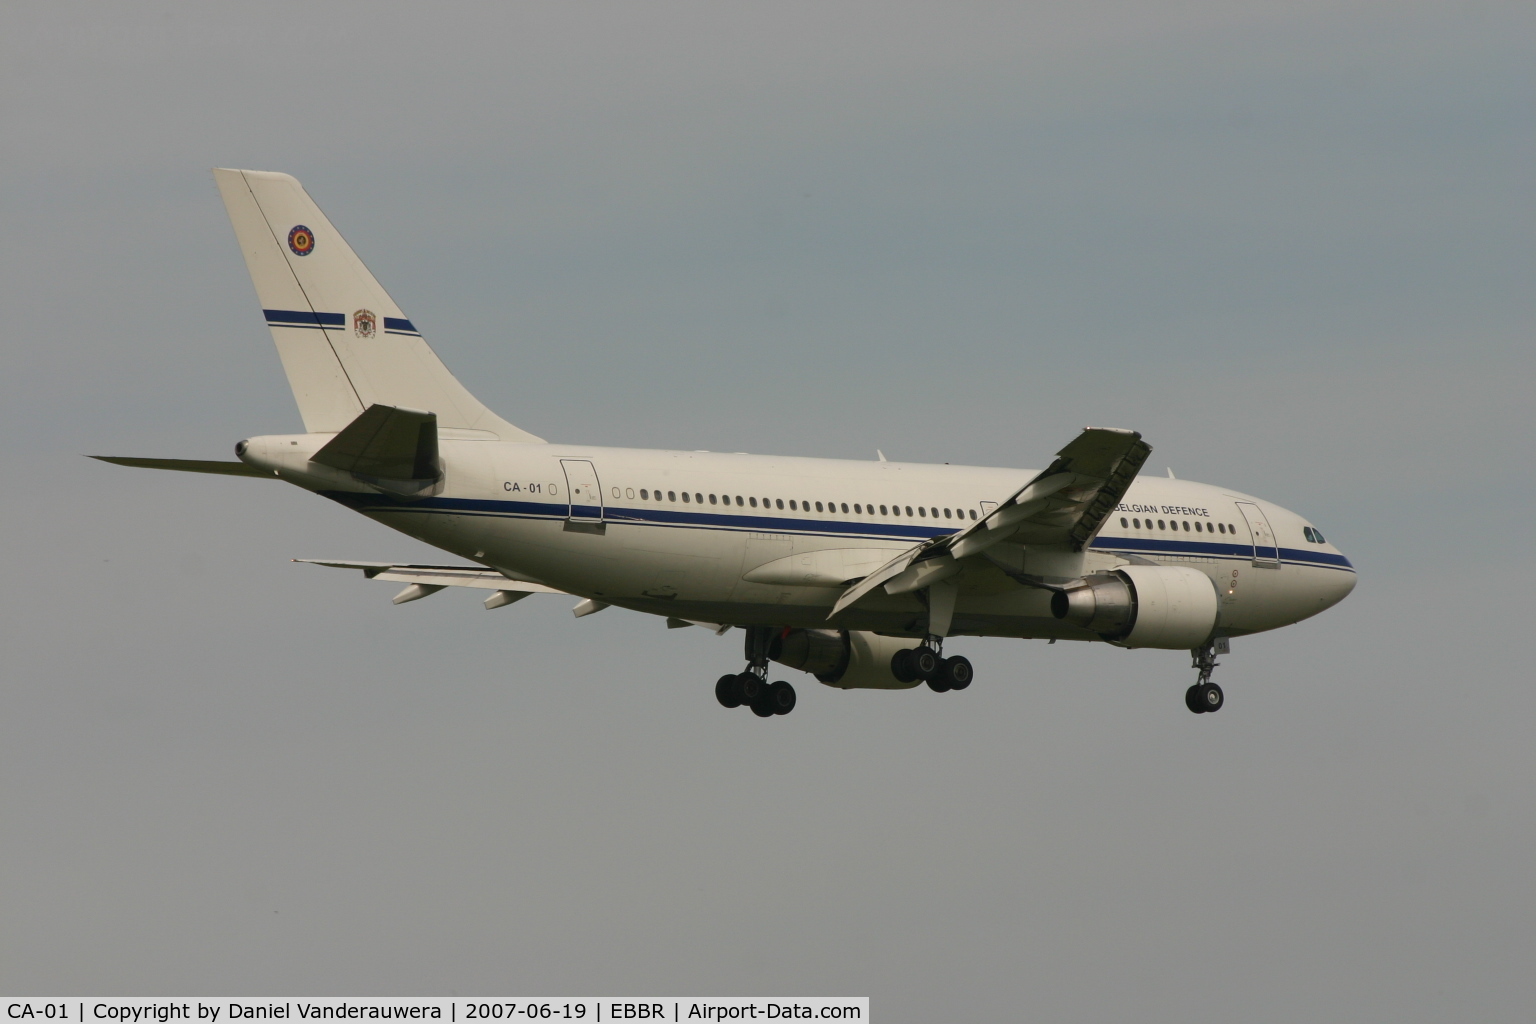 CA-01, 1985 Airbus A310-222 C/N 372, descending to rwy 02